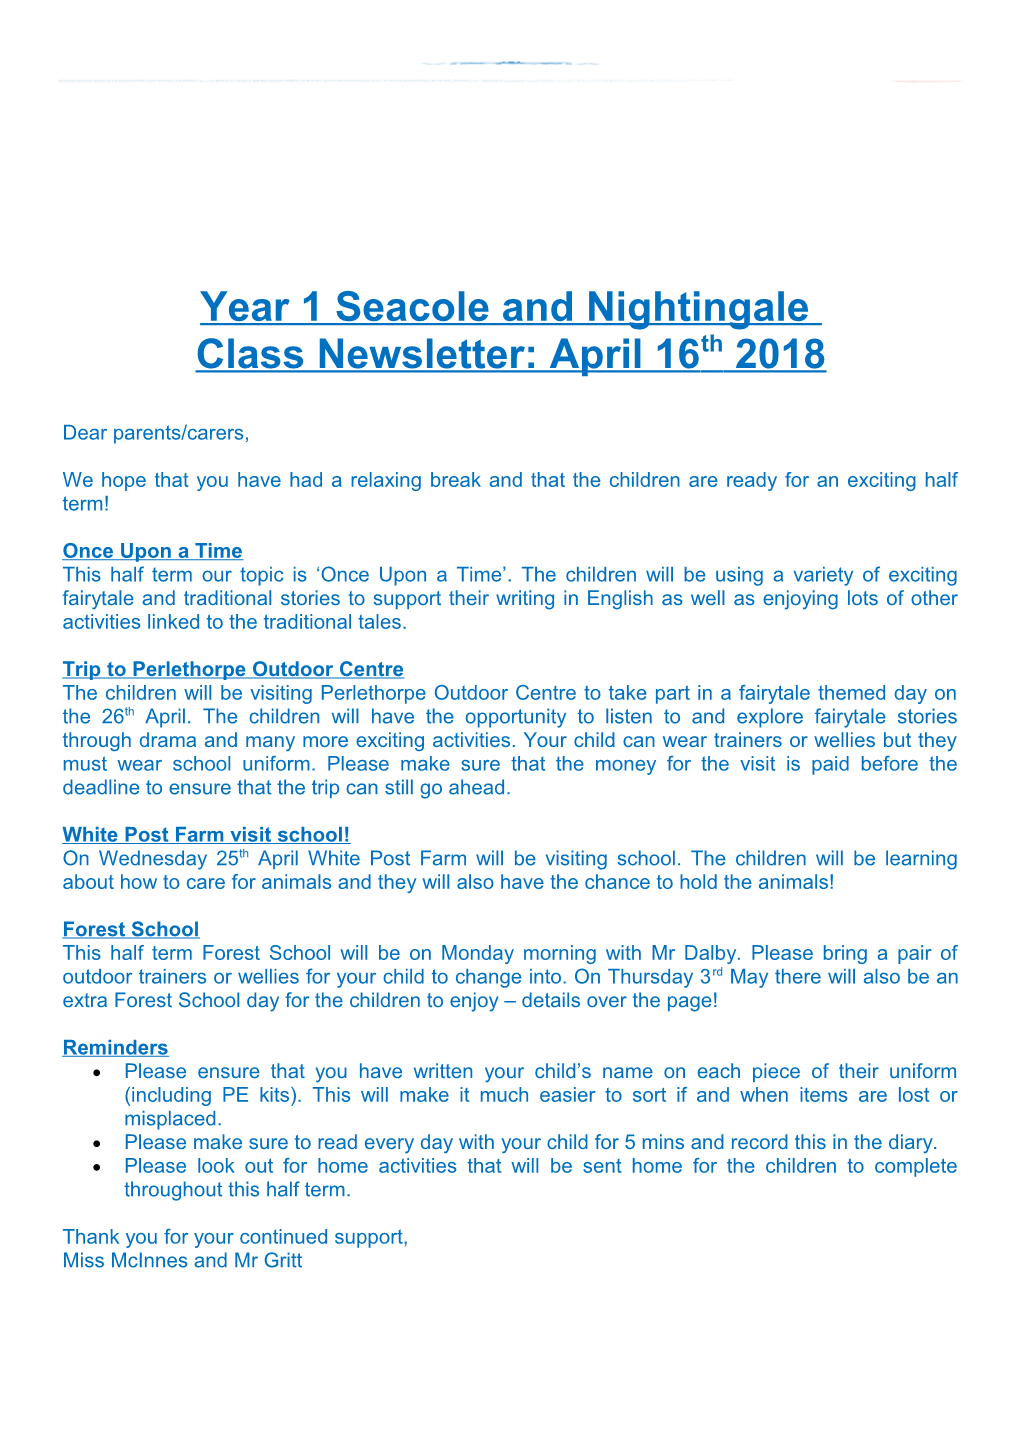 Year 1Seacole and Nightingale Class Newsletter: April 16Th2018